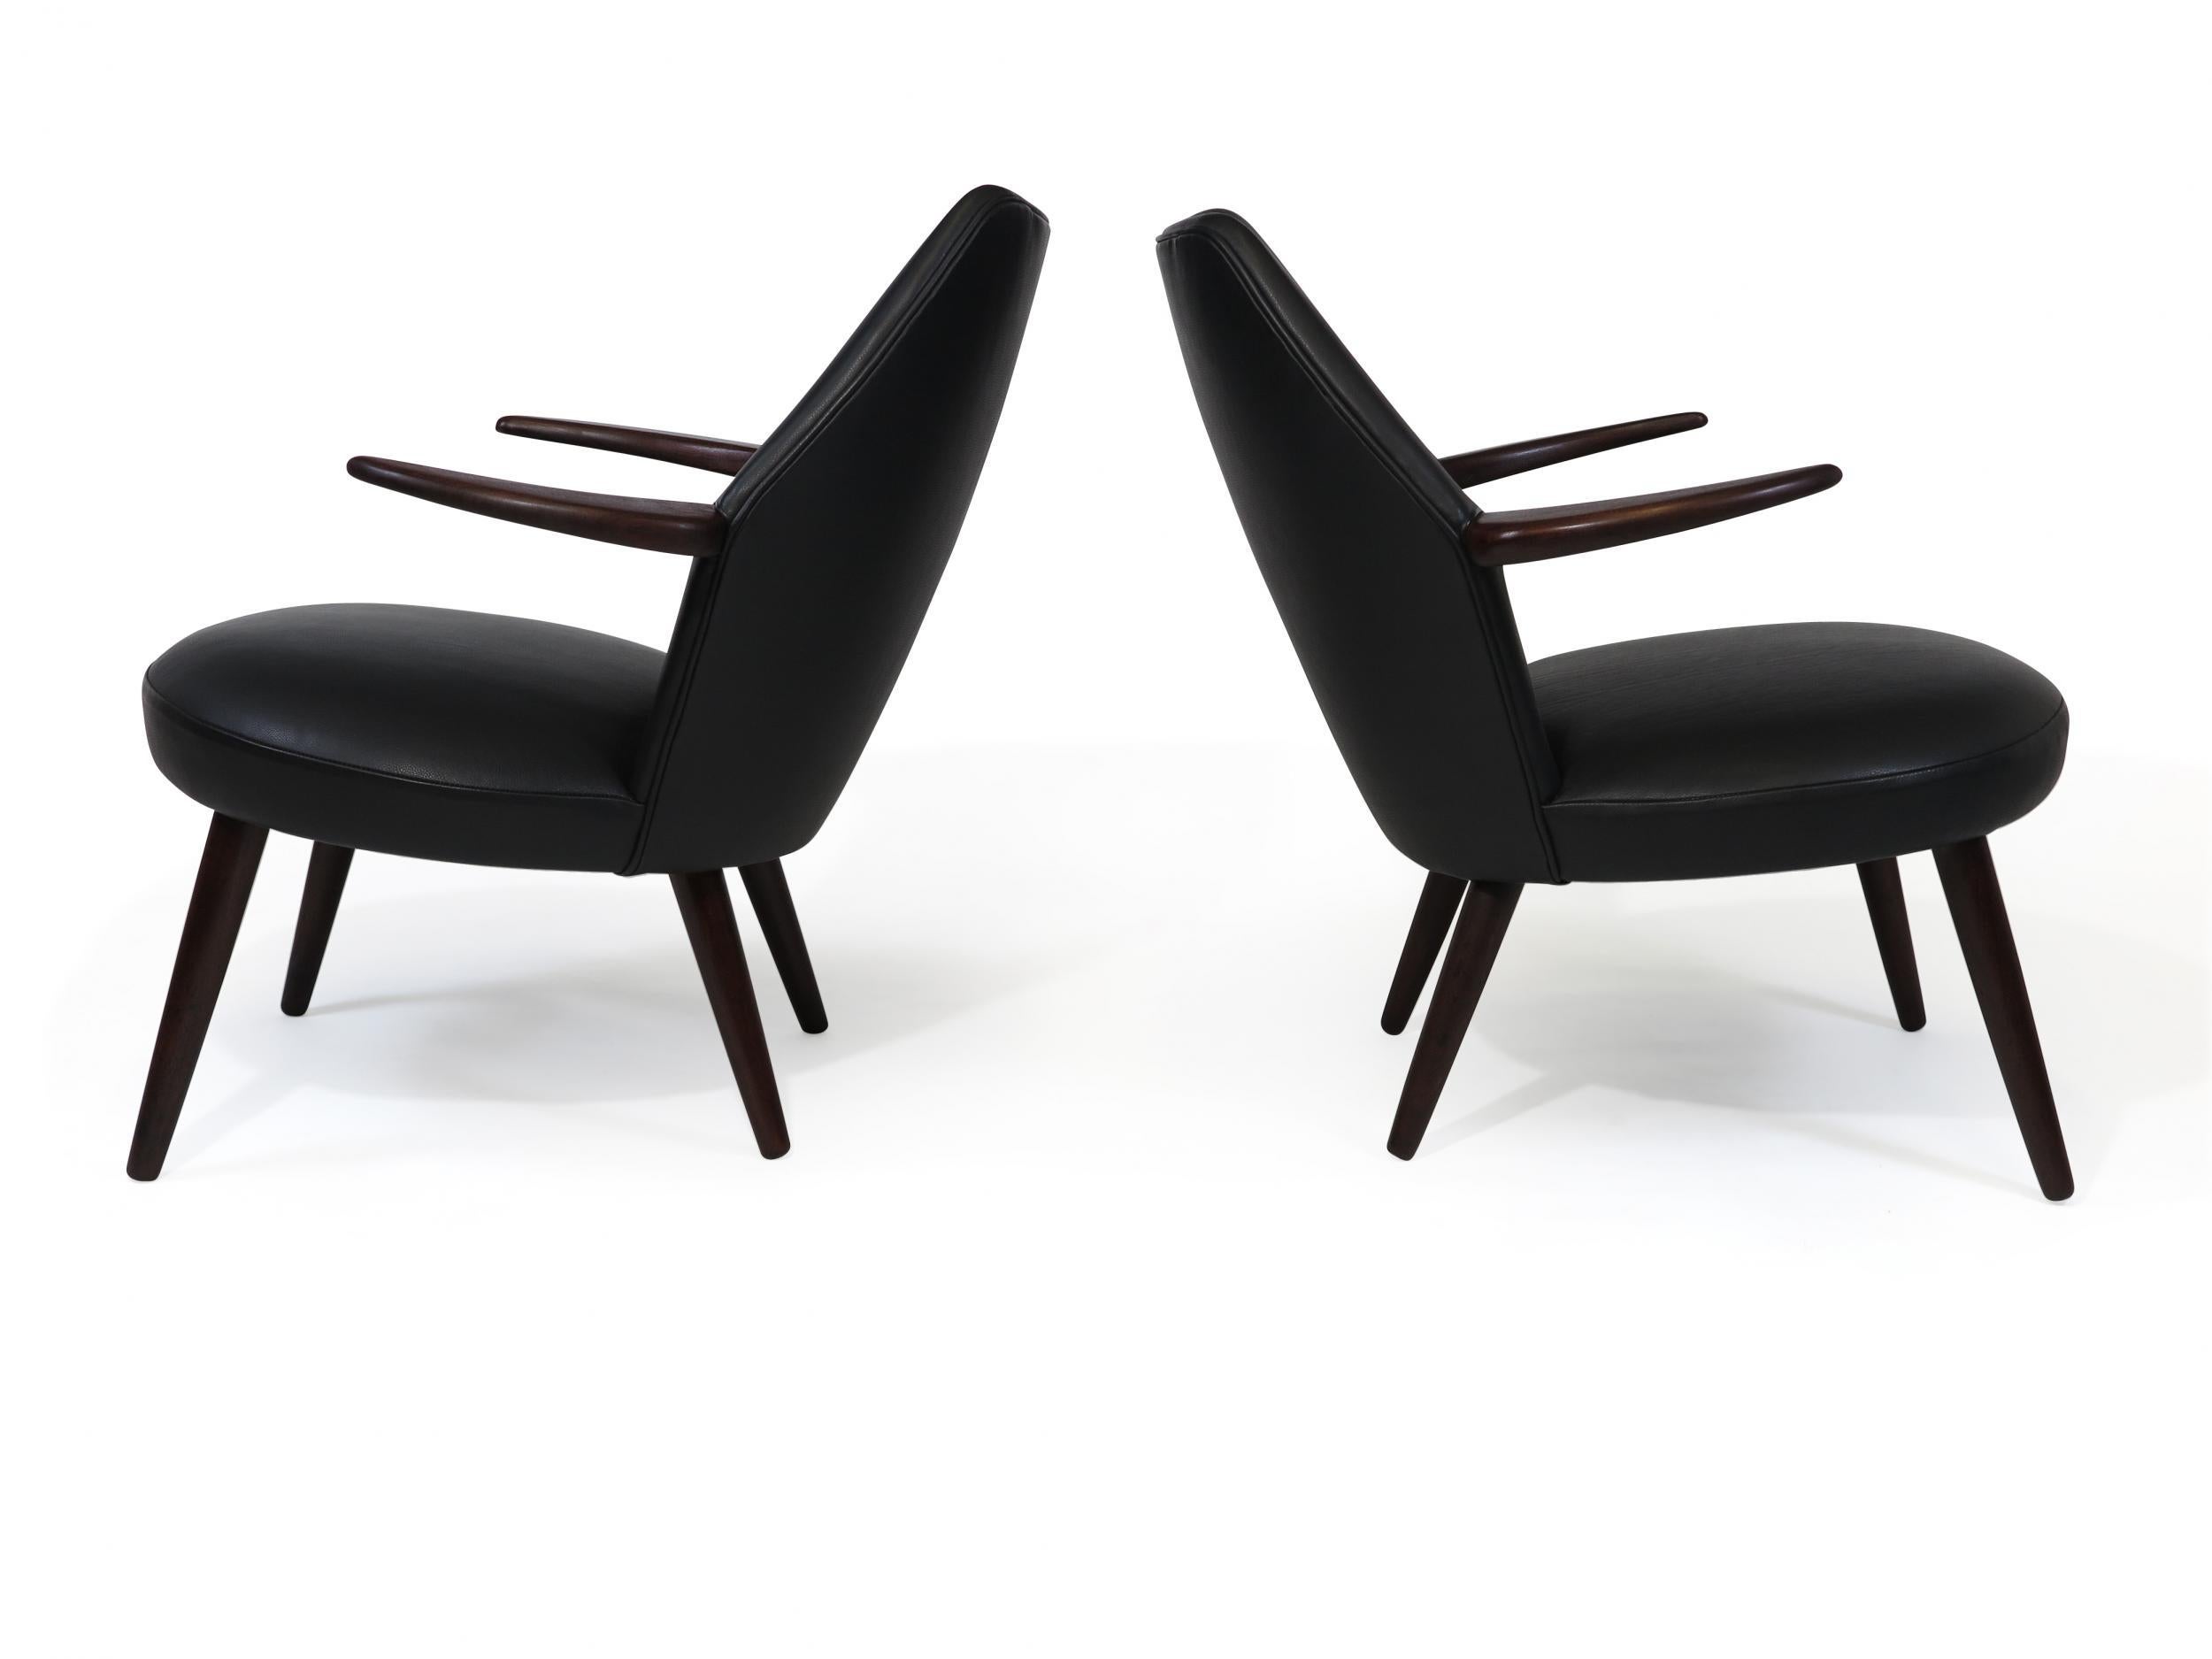 Midcentury Danish lounge chairs with curved back and horn shaped arms, raised on tapered teak legs, newly upholstered in black leather.